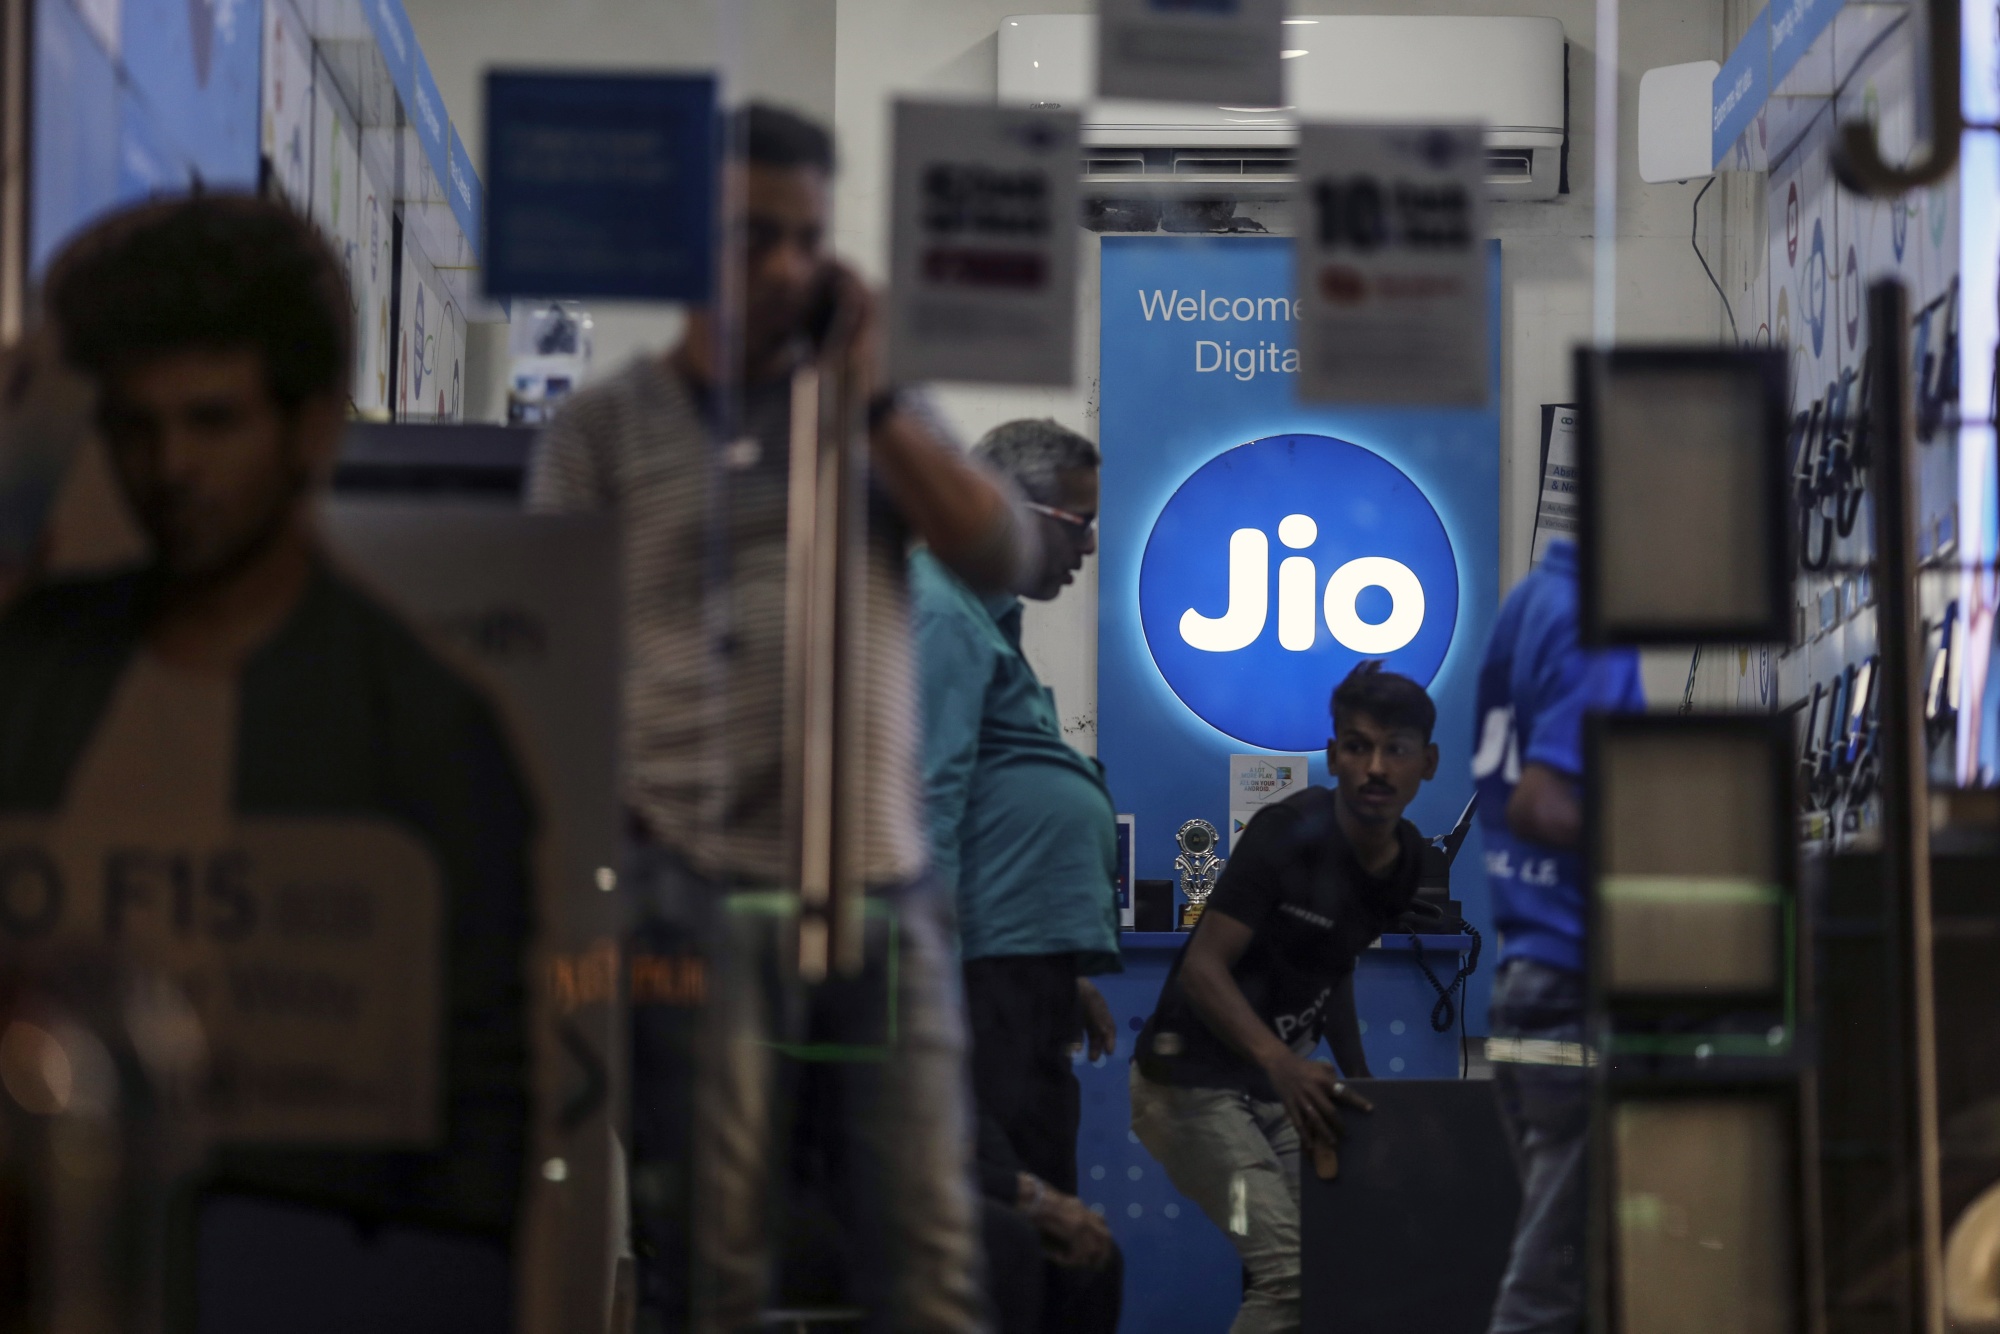 The logo of Reliance Jio is displayed inside a store in Mumbai.